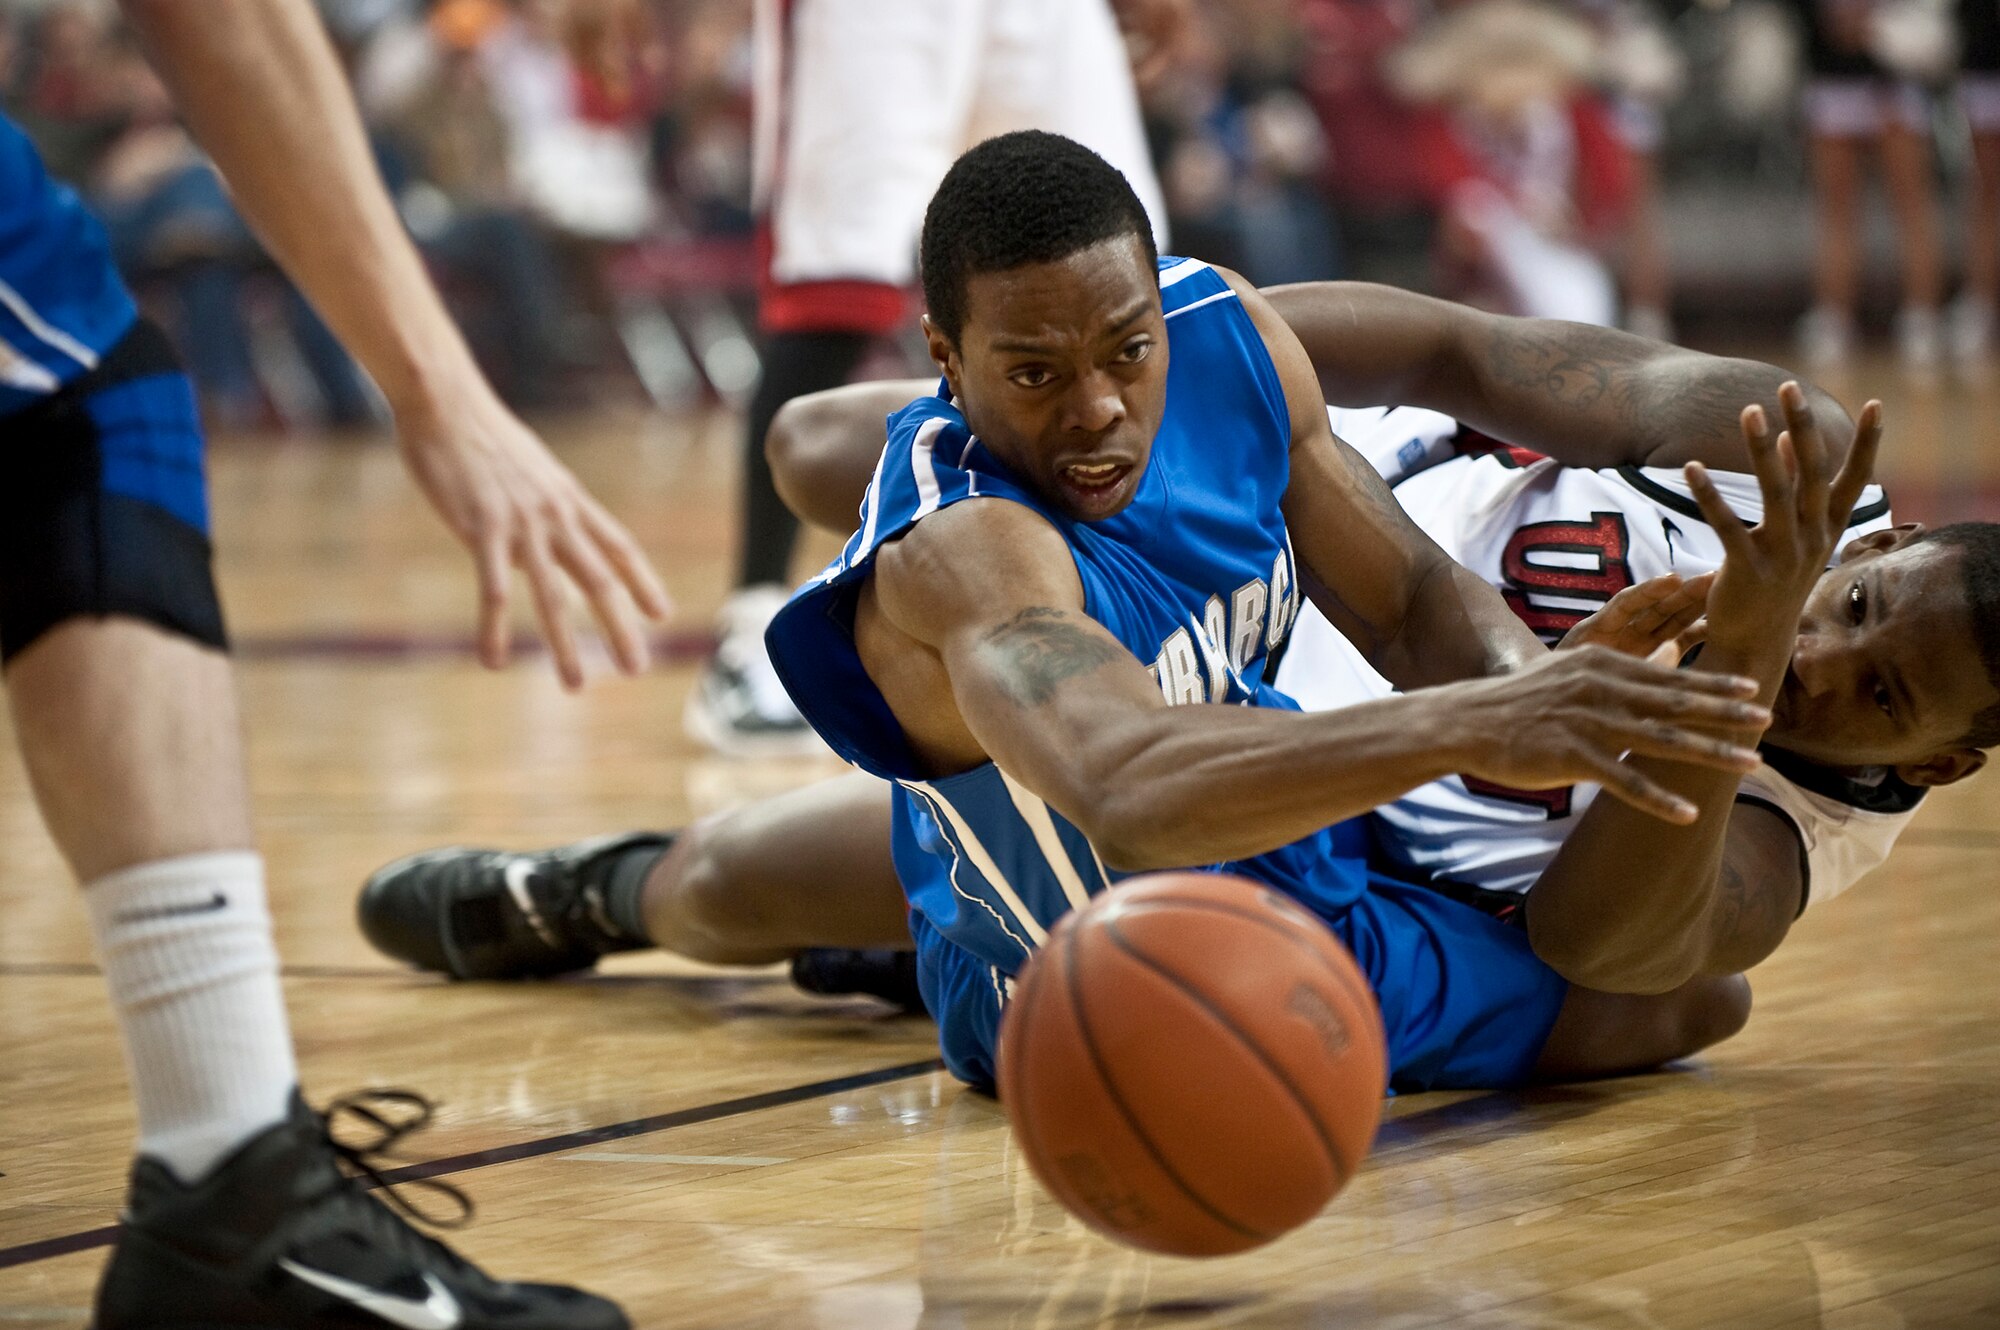 Falcons senior guard Evan Washington dives for a loose ball early in the first half of a mountain west conference basketball game against the University of Nevada, Las Vegas Runnin' Rebels Feb. 15, 2011, at the Thomas and Mac Center in Las Vegas, Nev. The Air Force Falcons came up short against UNLV 49-42, making their record 13-11 overall and 4-7 in the Mountain West Conference. (U.S. Air Force photo/Tech Sgt. Michael R. Holzworth)